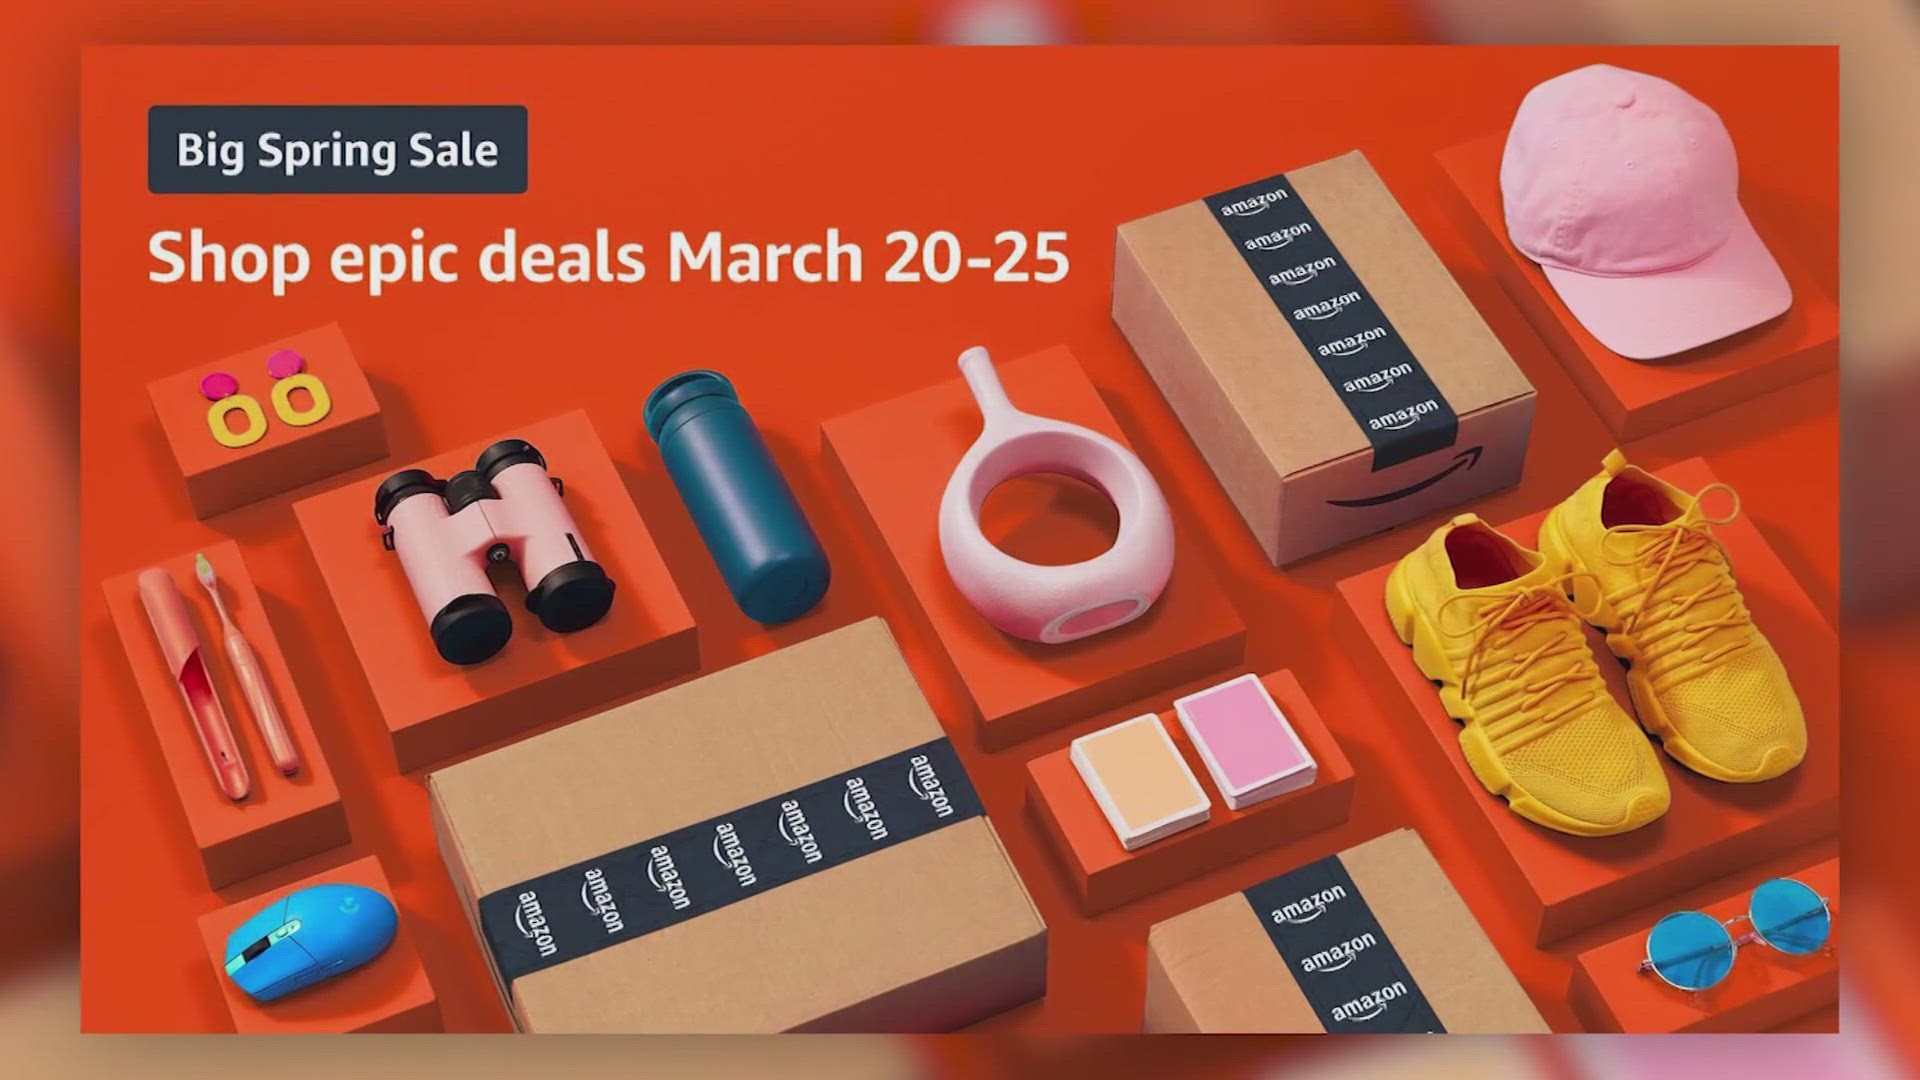 The first-ever "Big Spring Sale" will include deals on fitness products, spring fashion, cleaning and some yard items.